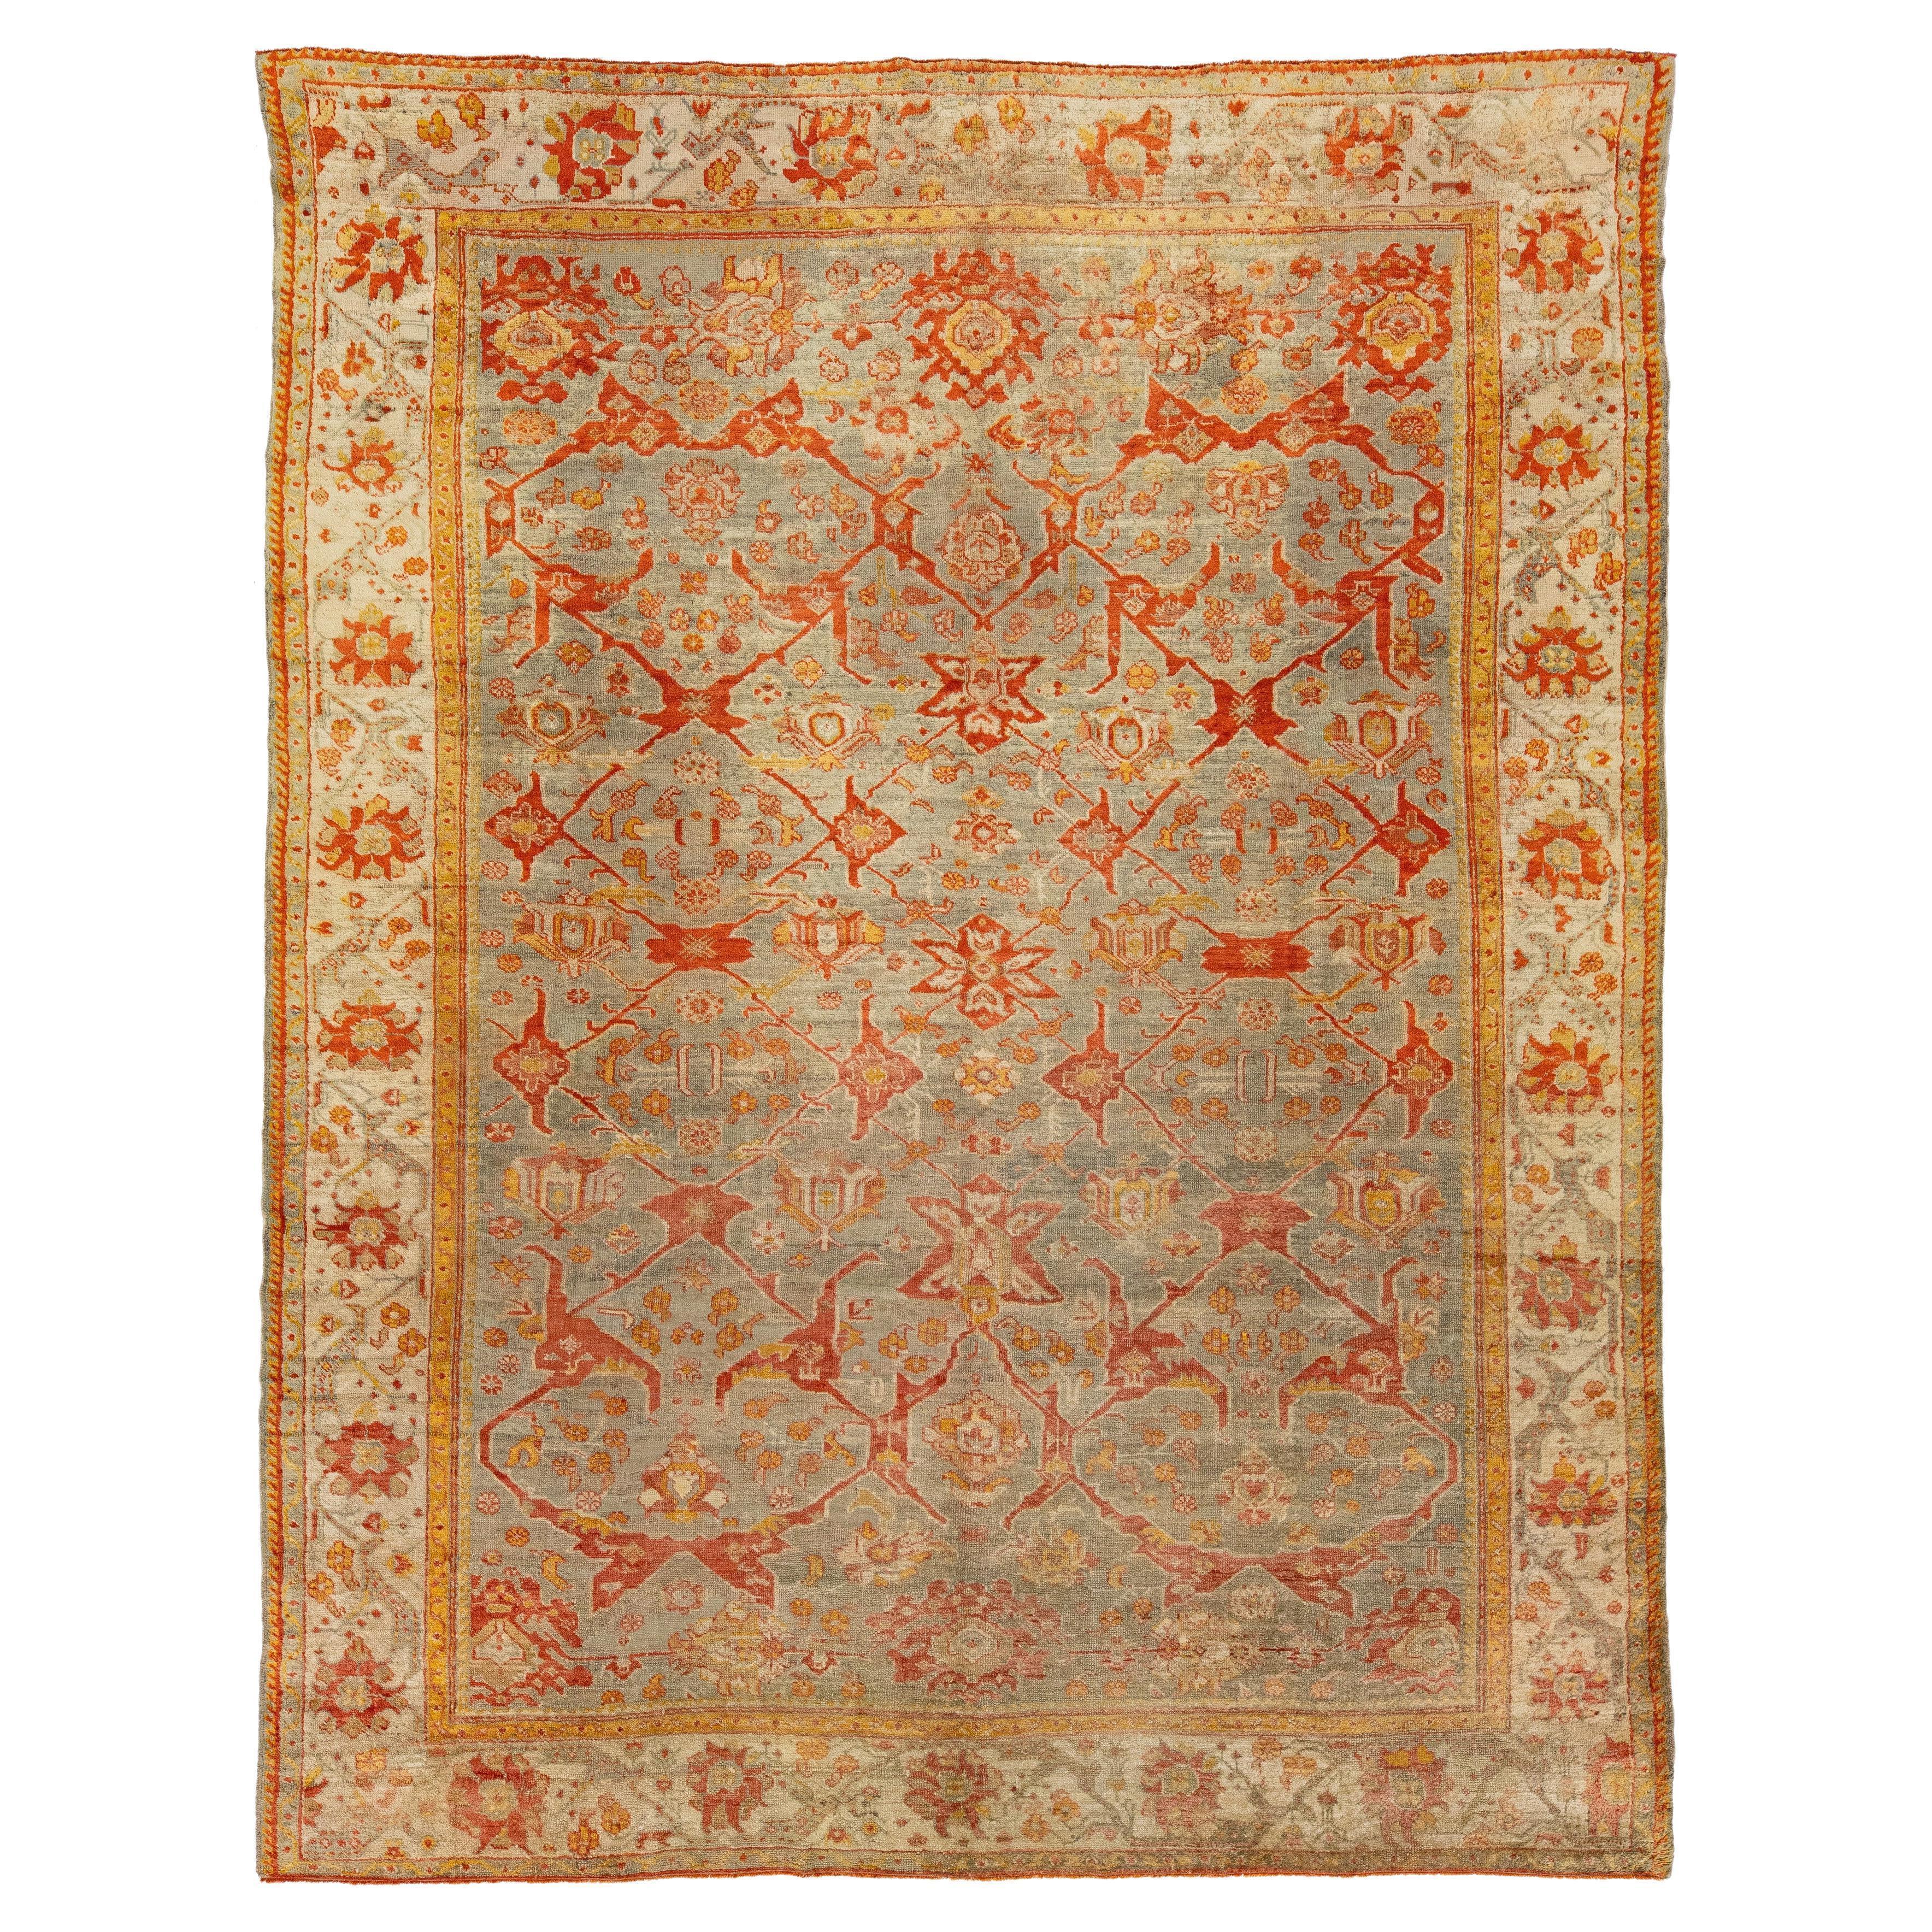 Turkish Oushak Antique Wool Rug Handmade Featuring a Floral Pattern In Rust 